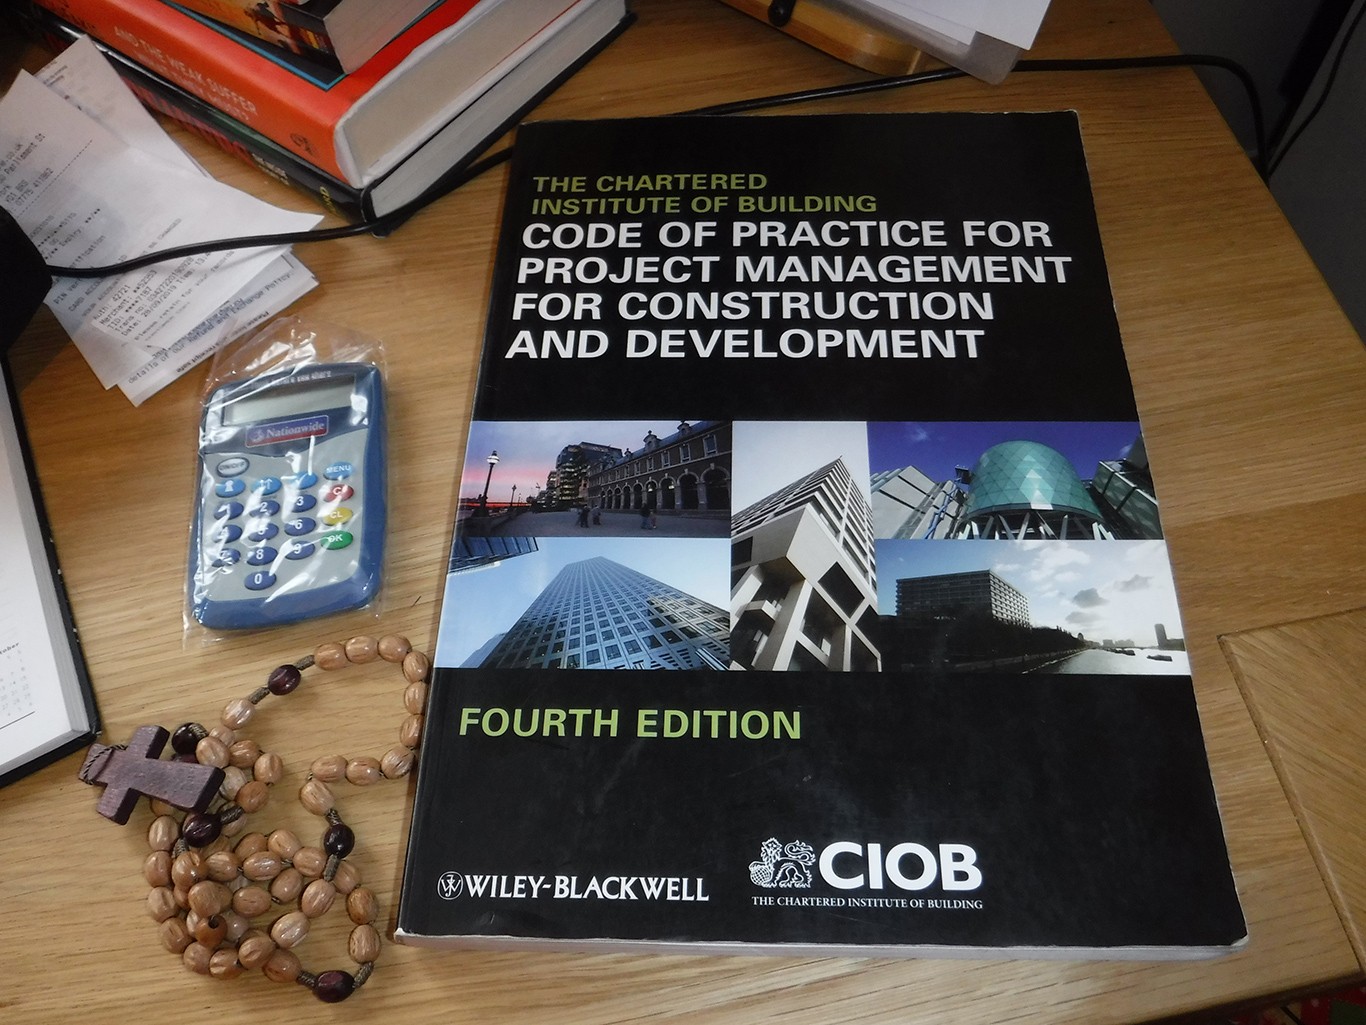 The Fourth Edition of the Chartered Institute of Building Code of Practice for Project Management for Construction and Development